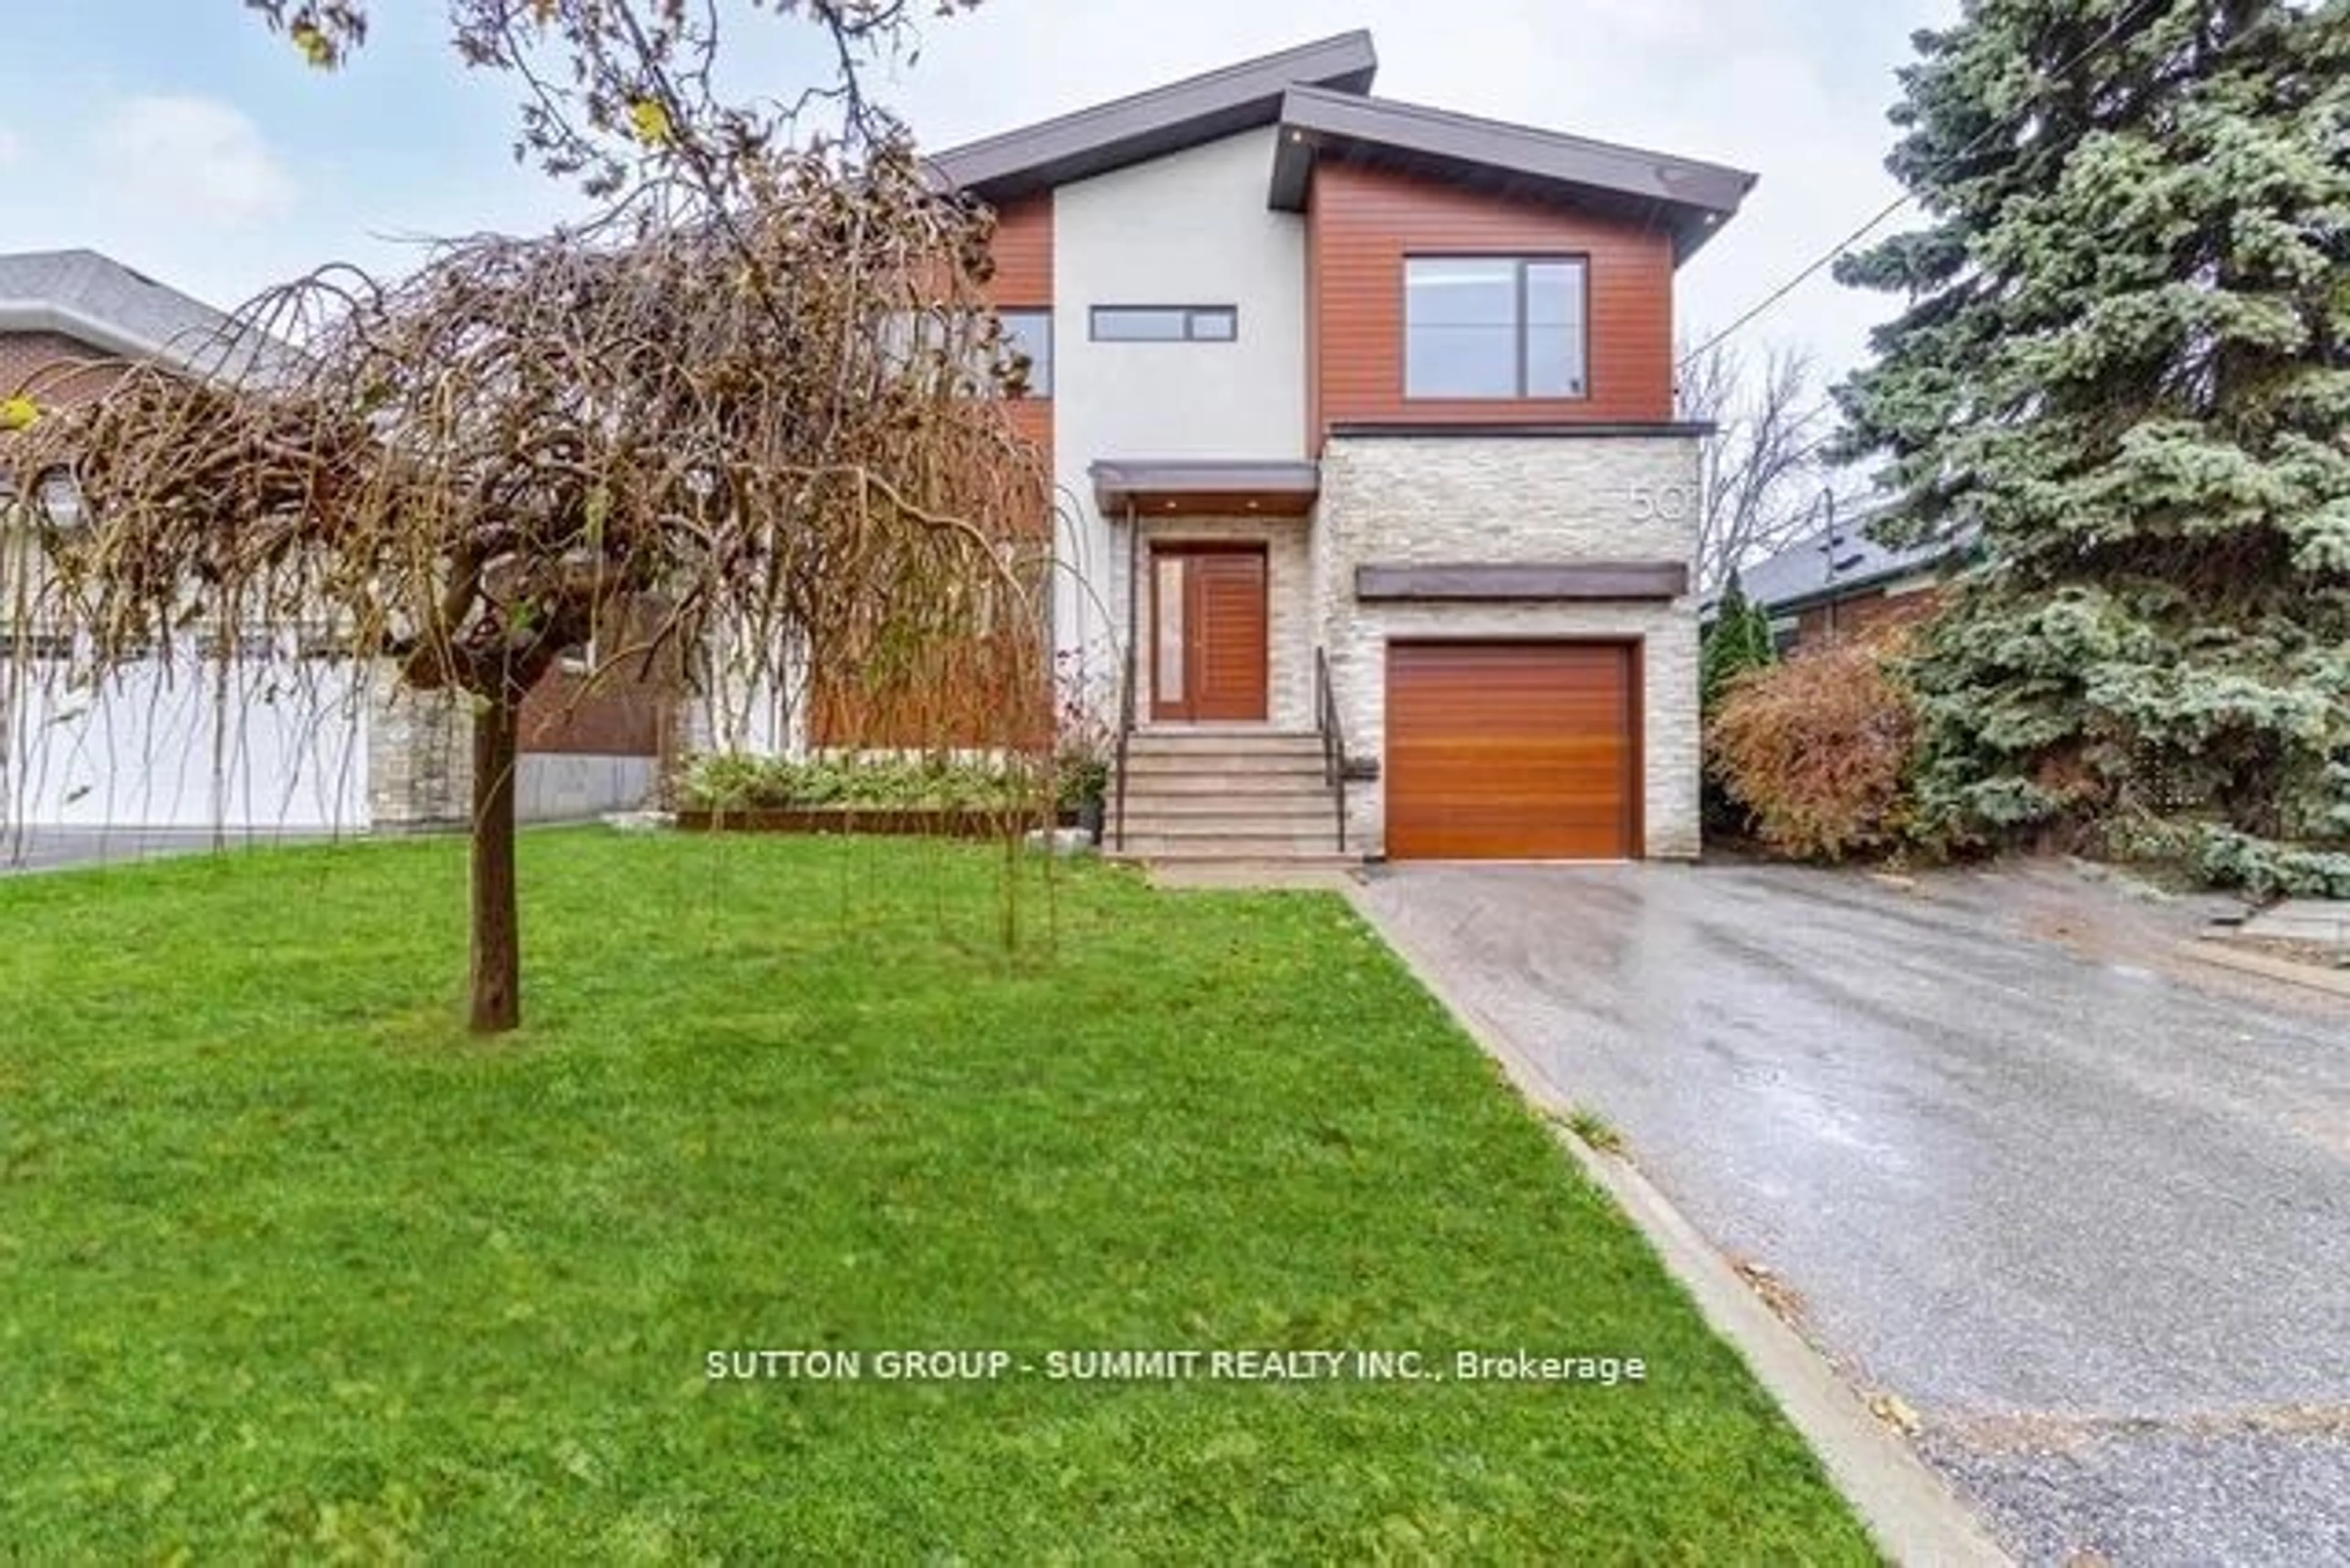 Home with brick exterior material for 50 Greenfield Dr, Toronto Ontario M9B 1H3